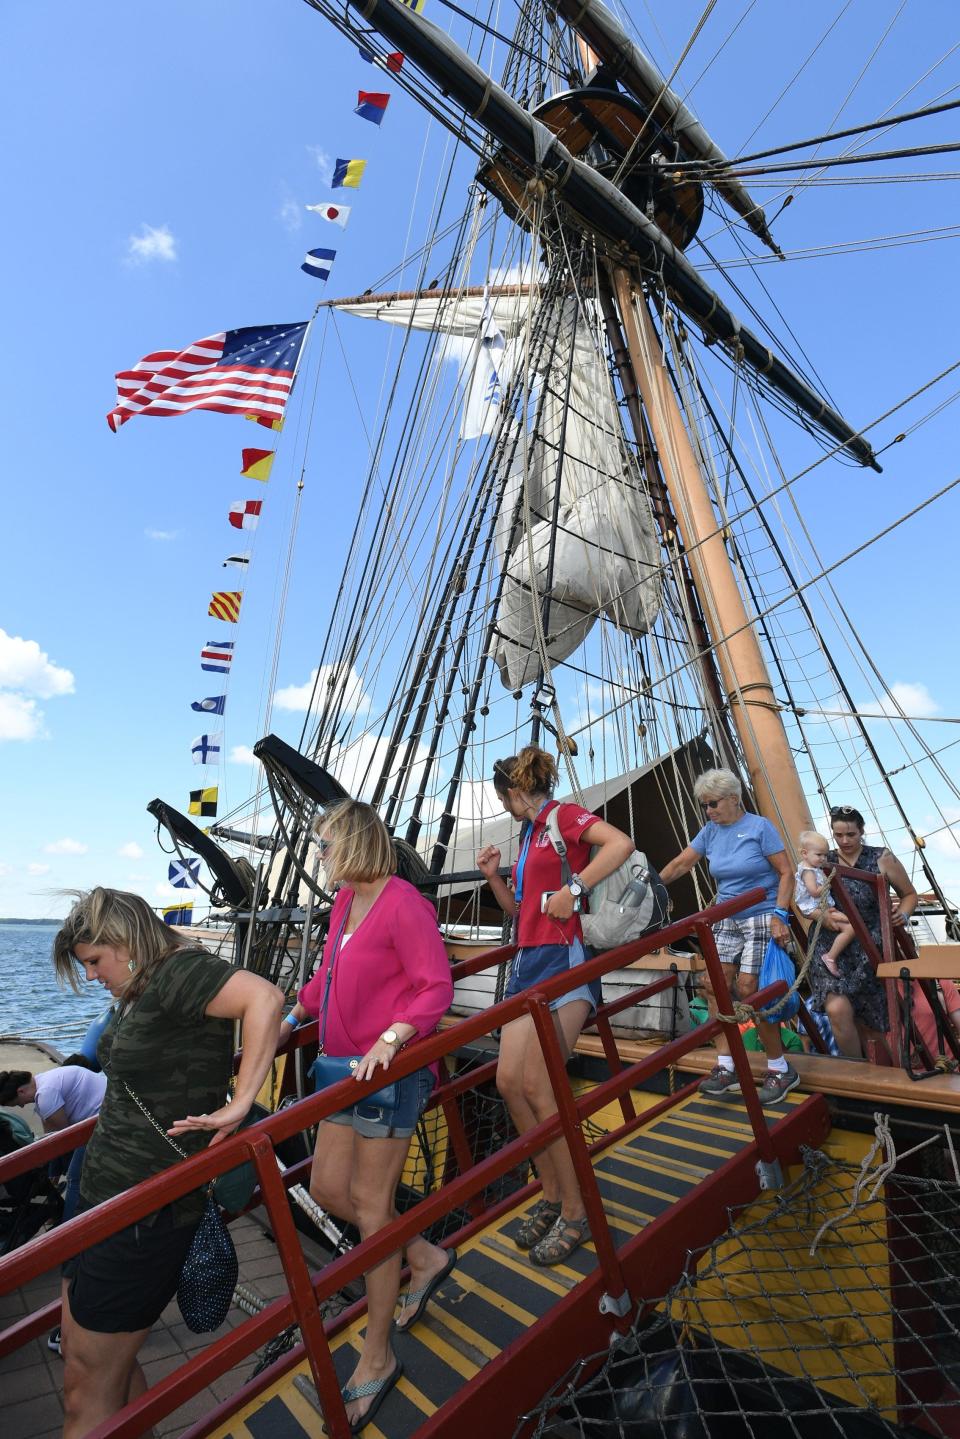 Spectators exit the U.S. Brig Niagara, docked Aug. 23, 2019, at Dobbins Landing on Presque Isle Bay in Erie. The tall ship was one of the featured attractions of the 2019 Tall Ships Erie festival. 